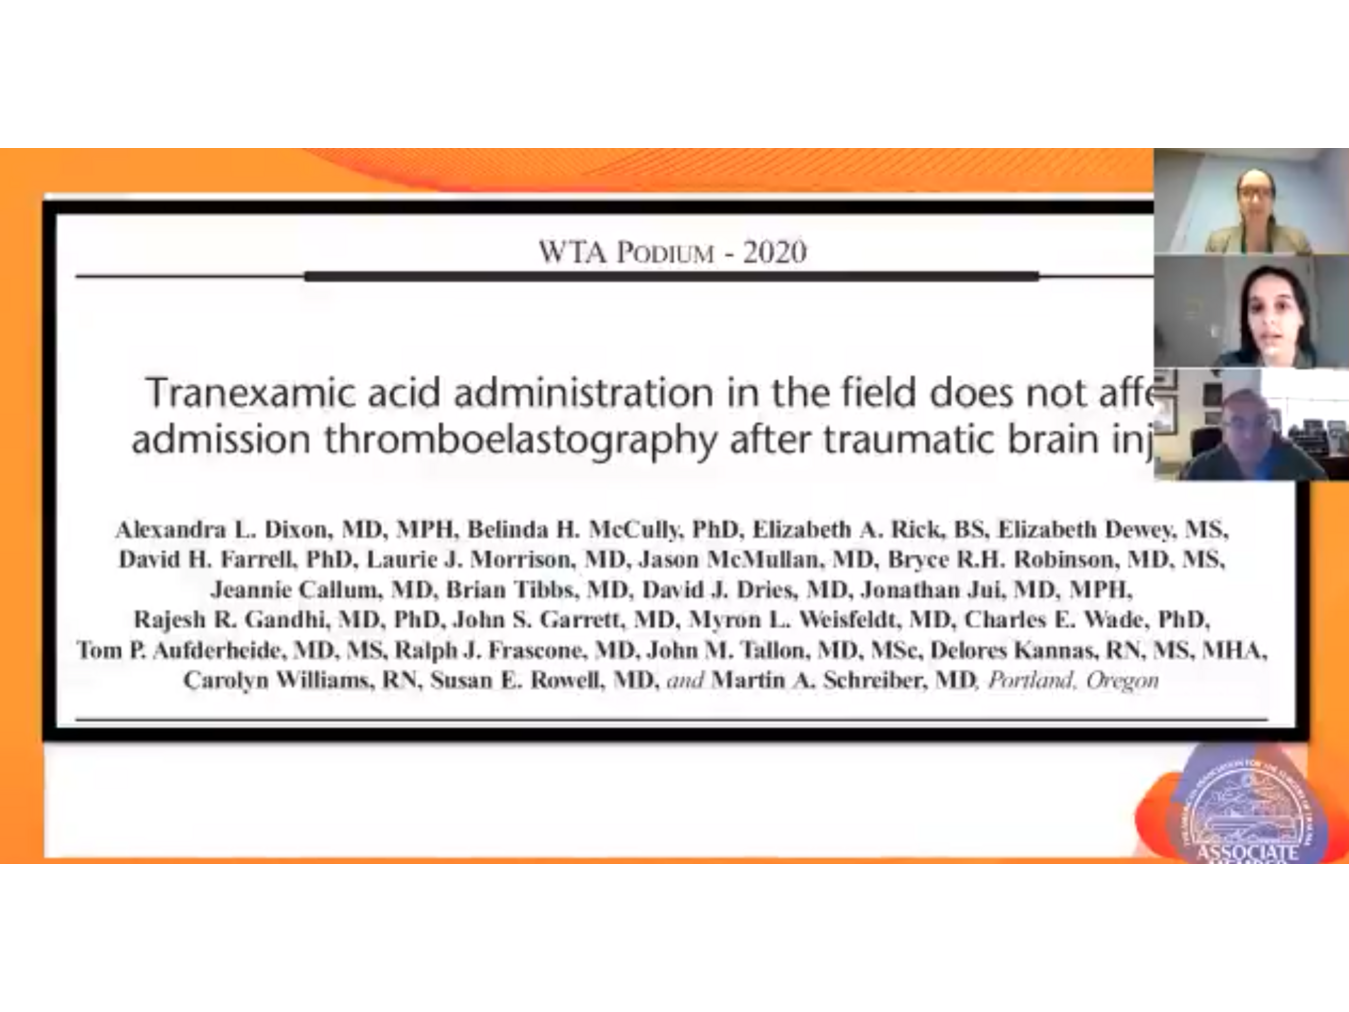 Tranexamic Acid Administration in the Field Does Not Affect Admission Thromboelastography After Traumatic Brain Injury